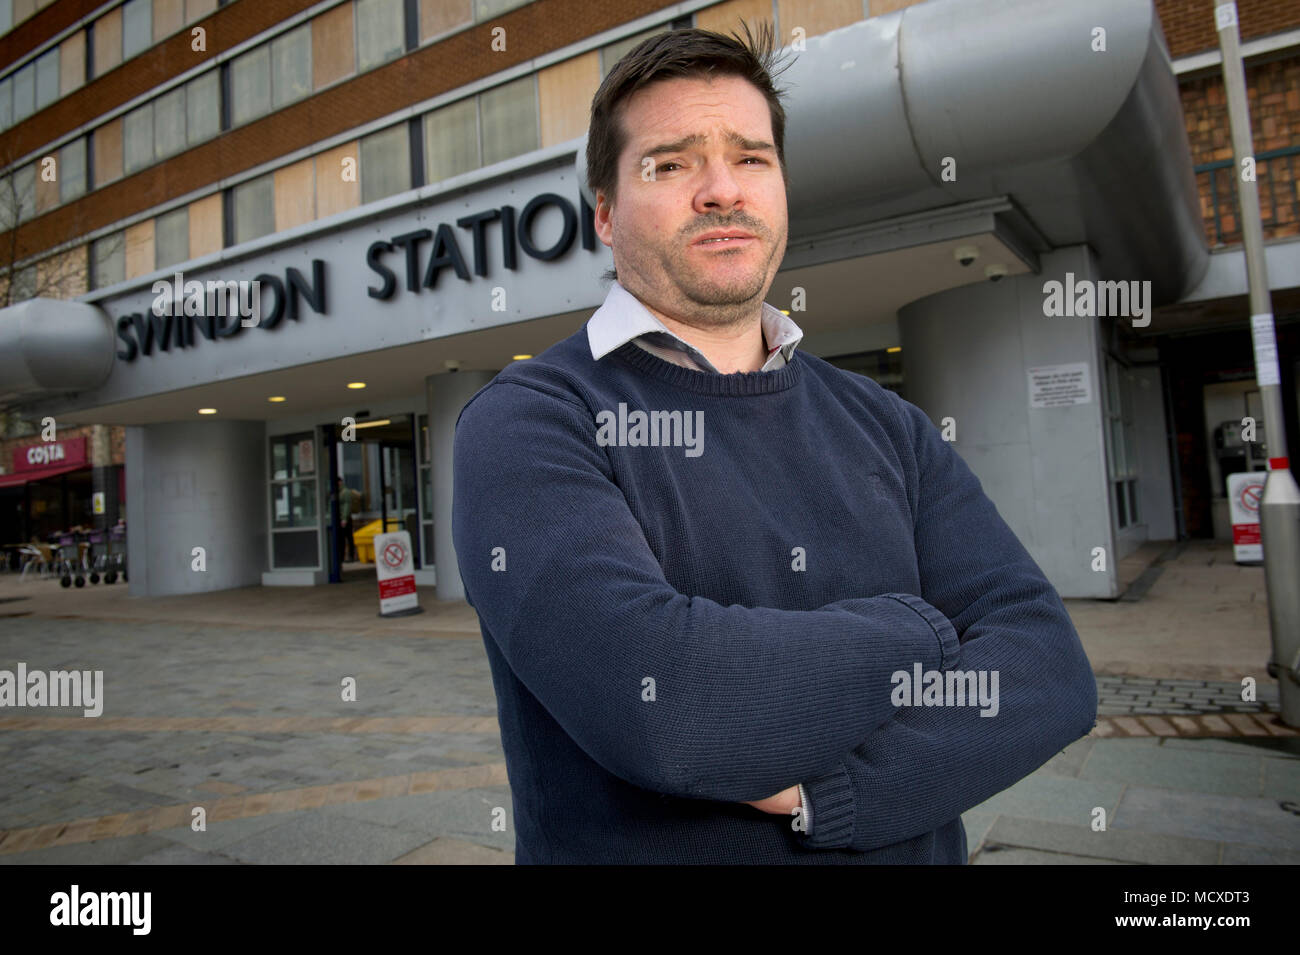 Martin Costello, UKIP candidate in Swindon, Wiltshire, photographed in front of Swindon station and the site of the new art gallery. Stock Photo